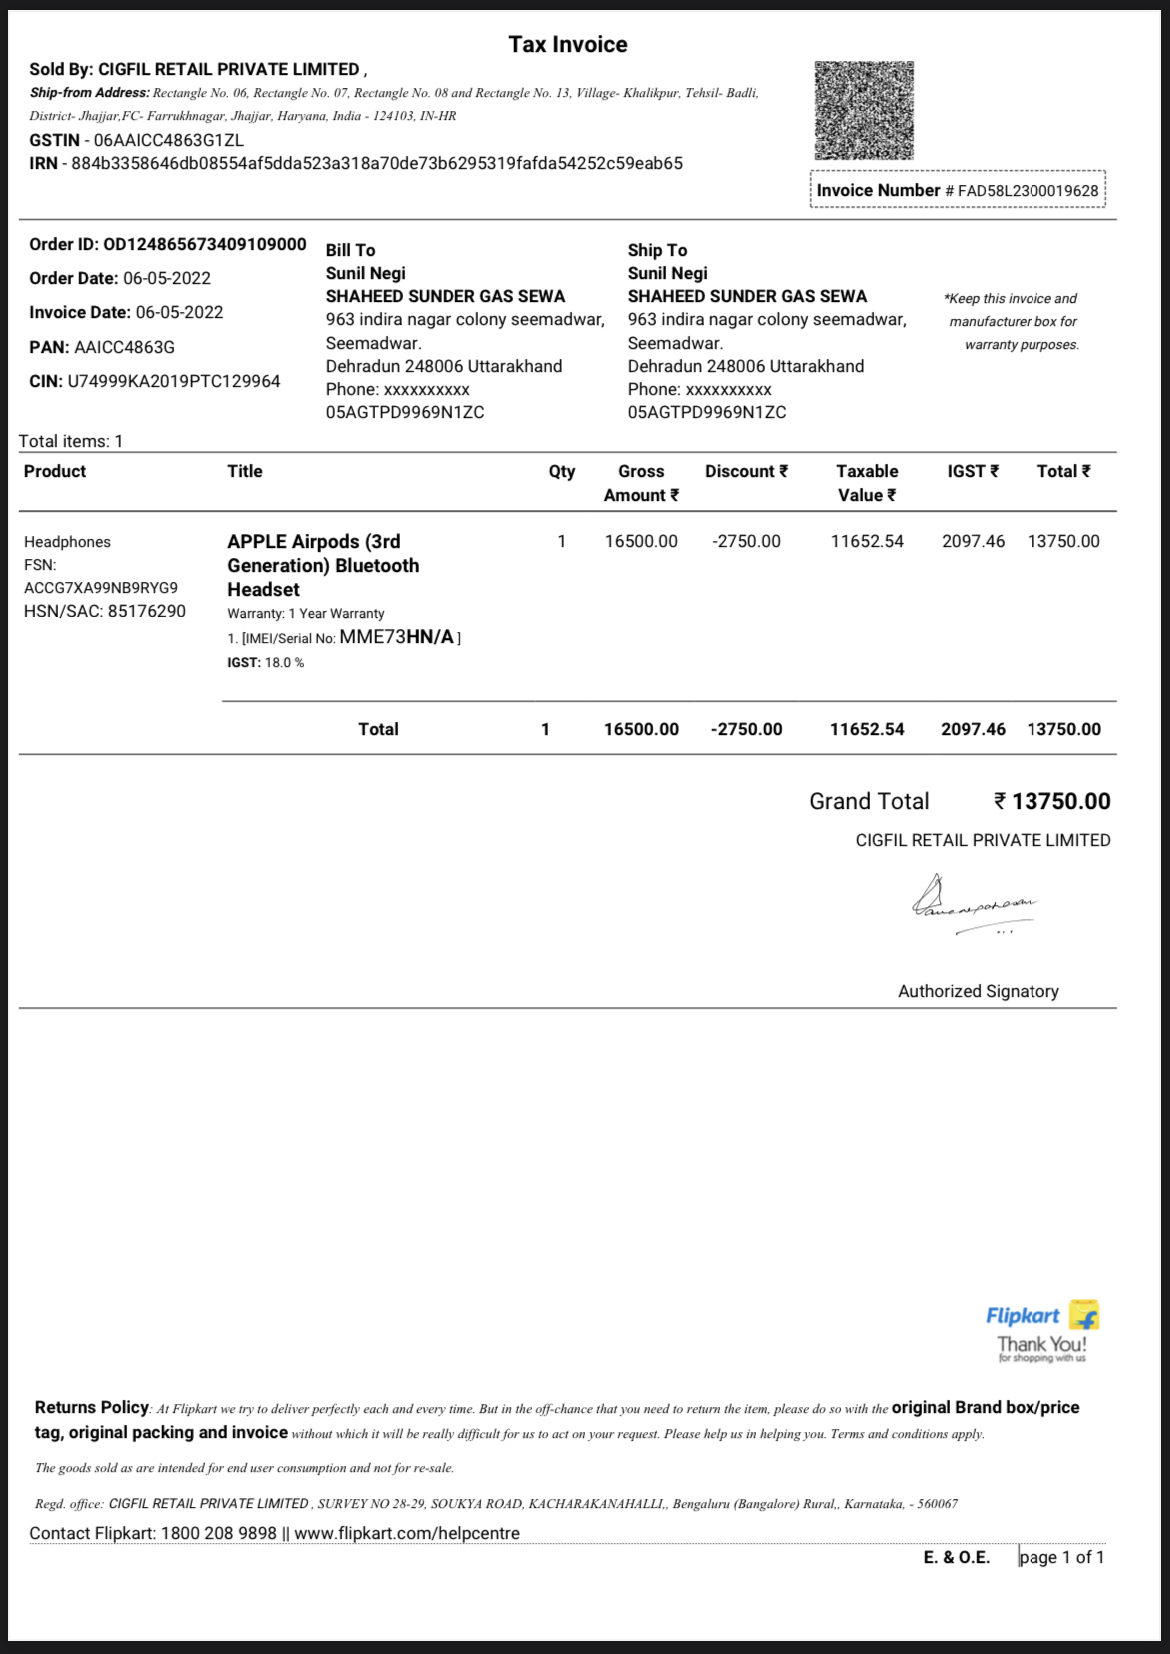 Received invoice with wrong serial number | Consumer Complaints Court